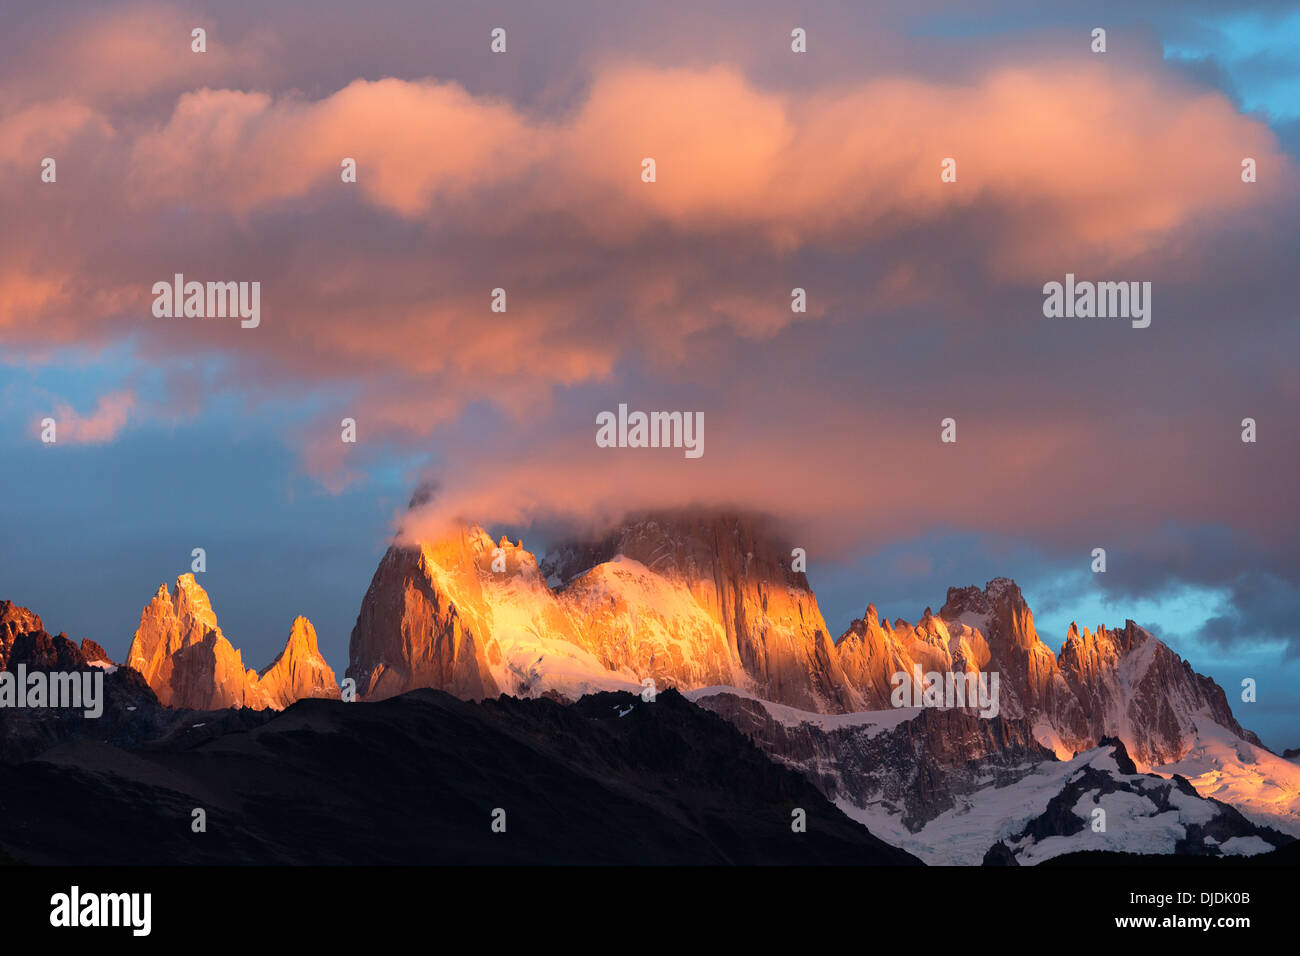 Cloud formation covering the peaks of Fitz Roy Massif.Pategonia.Argentina Stock Photo